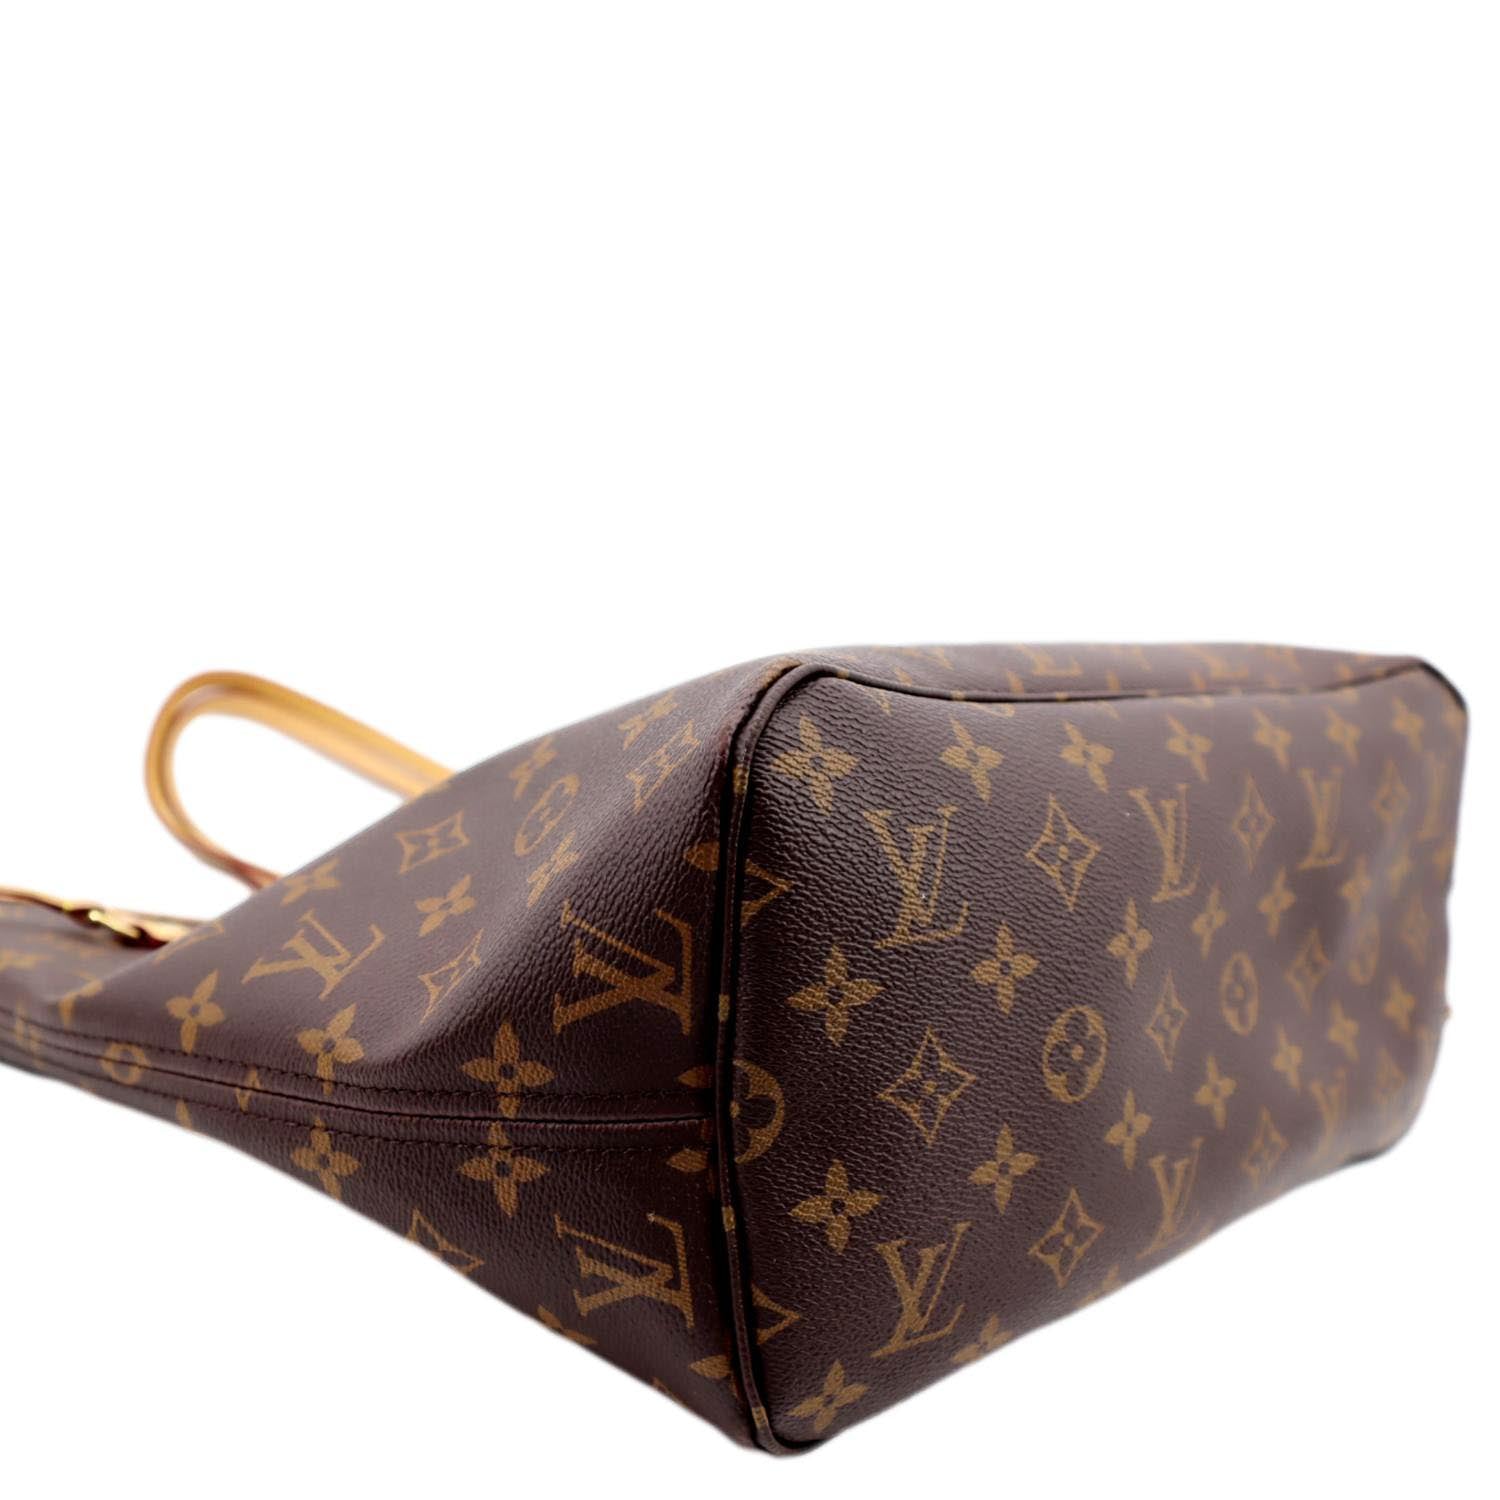 LOUIS VUITTON - Neverfull MM coated-canvas tote bag